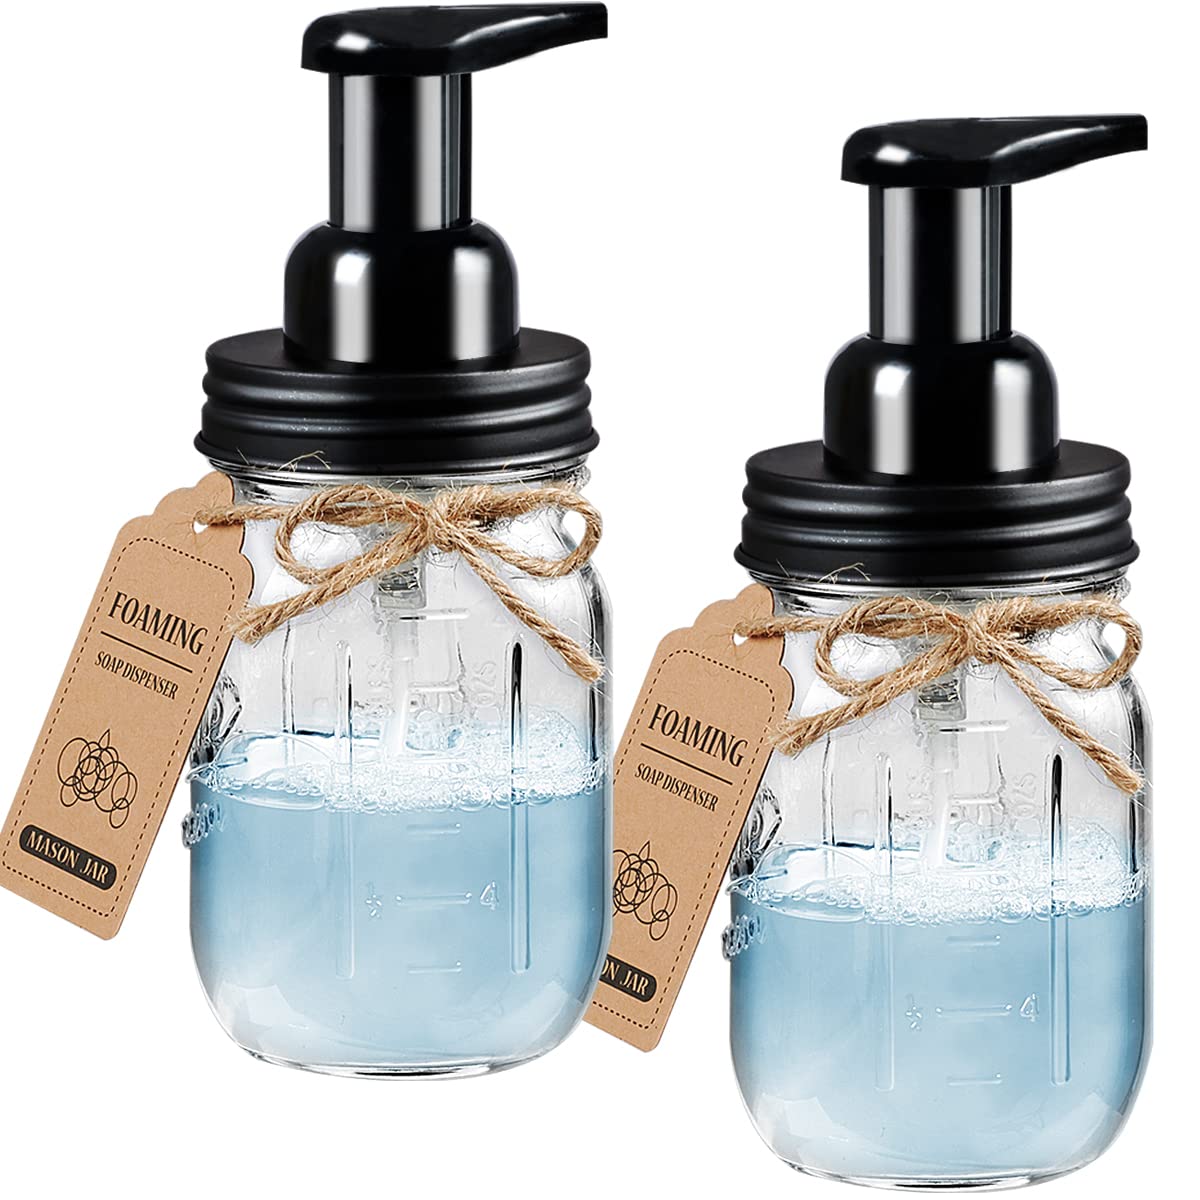 Book Cover Mason Jar Foaming Soap Dispenser - with 16 Ounce Mason Jar for Bathroom Vanities,Kitchen Sink,Countertops - Made from Rust Proof Stainless Steel Lid and BPA Free Pump / Black,2 Pack Black 2 Pack